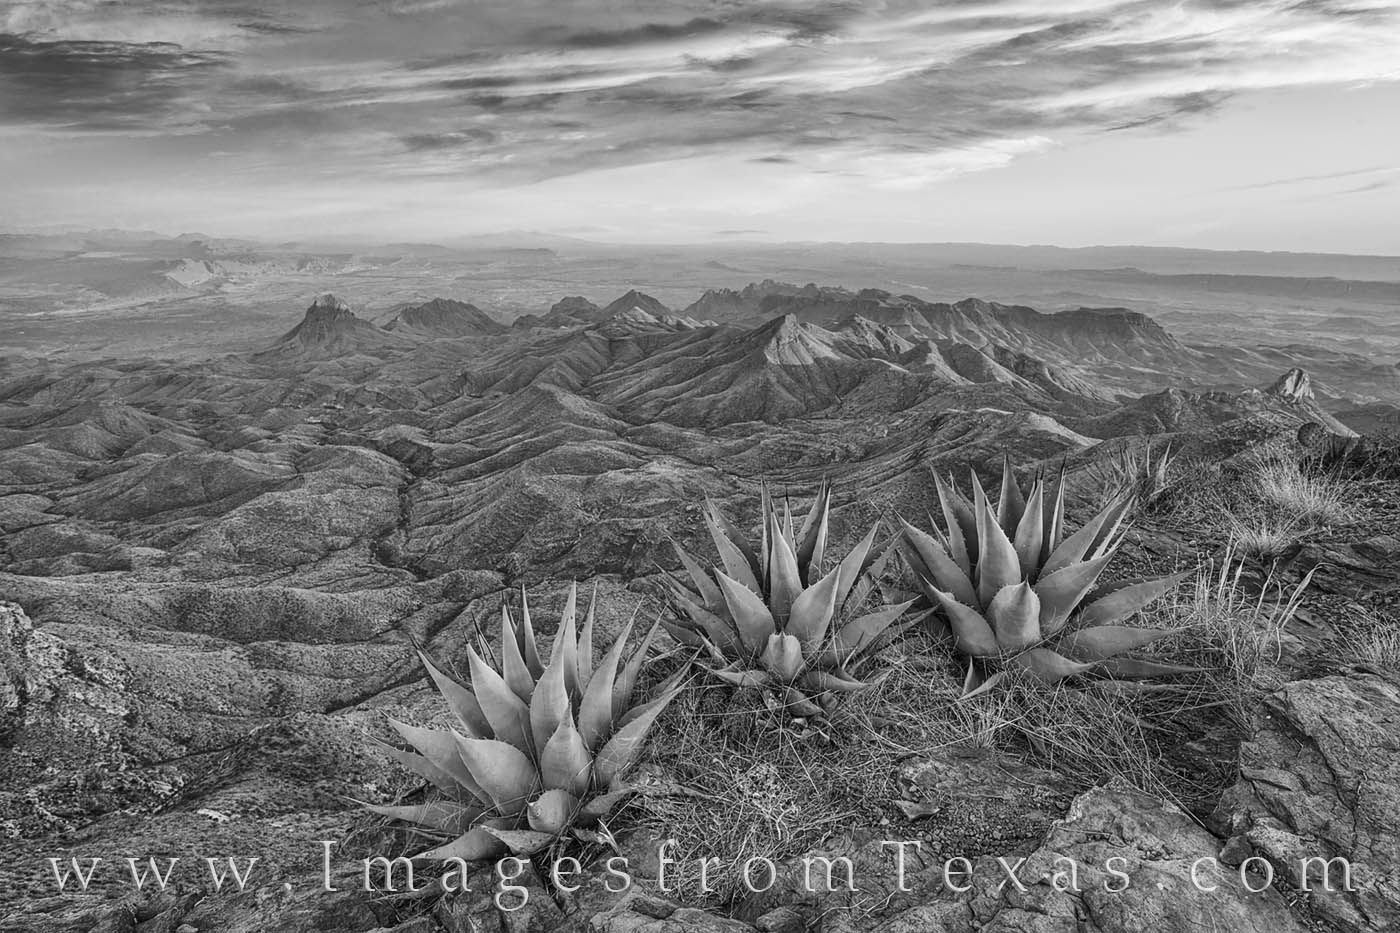 From the edge of the South Rim cliff, this landscape in black and white looks acoss the ancient Chisos Mountains, the Rio Grande...